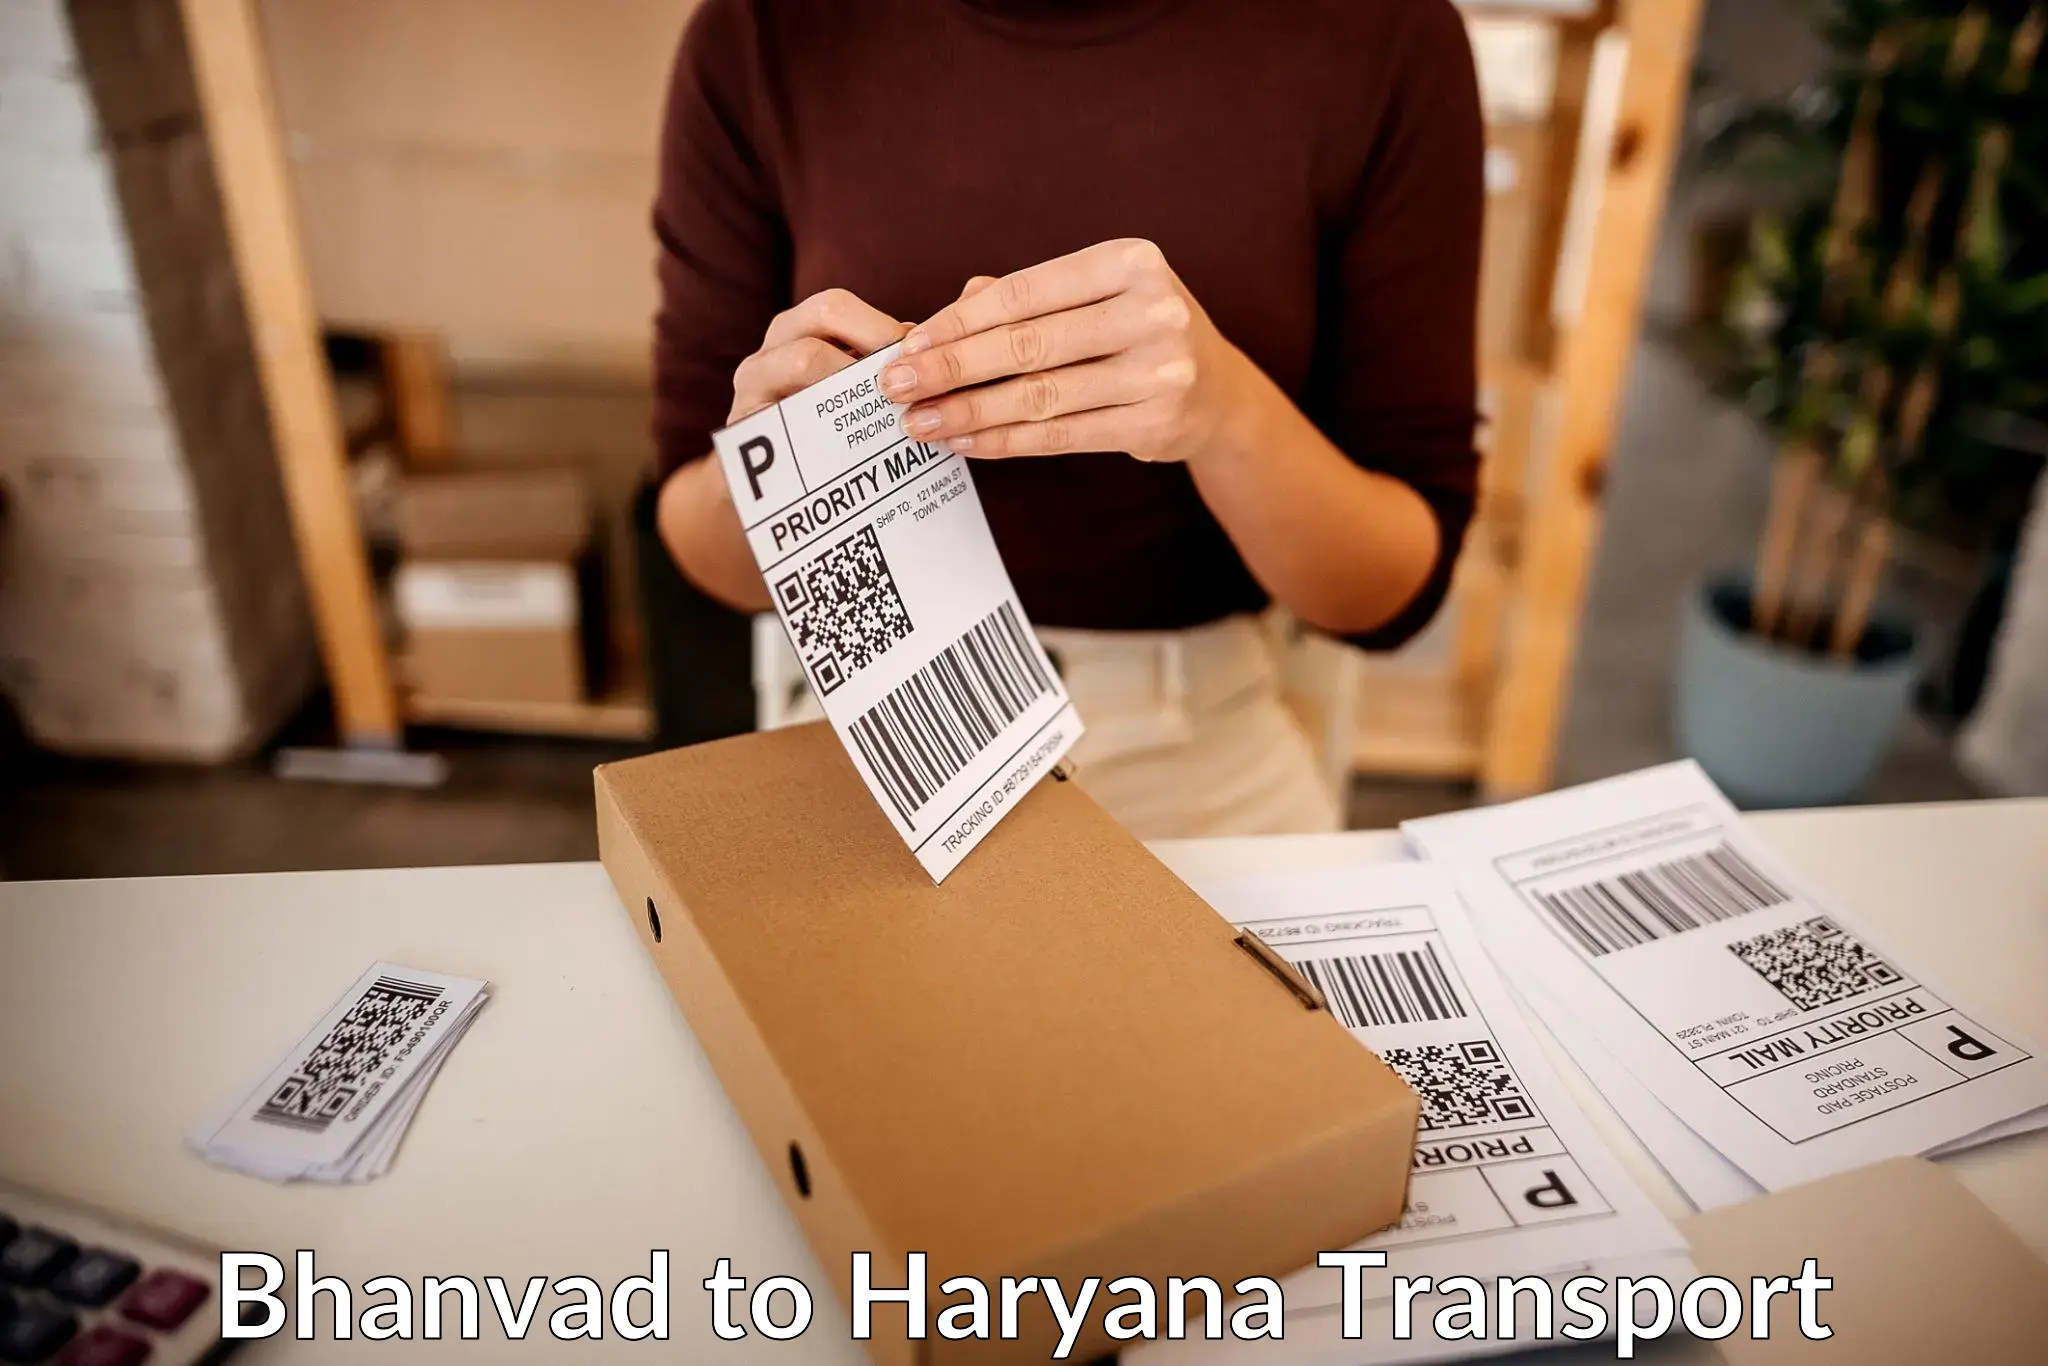 Air cargo transport services in Bhanvad to Panchkula